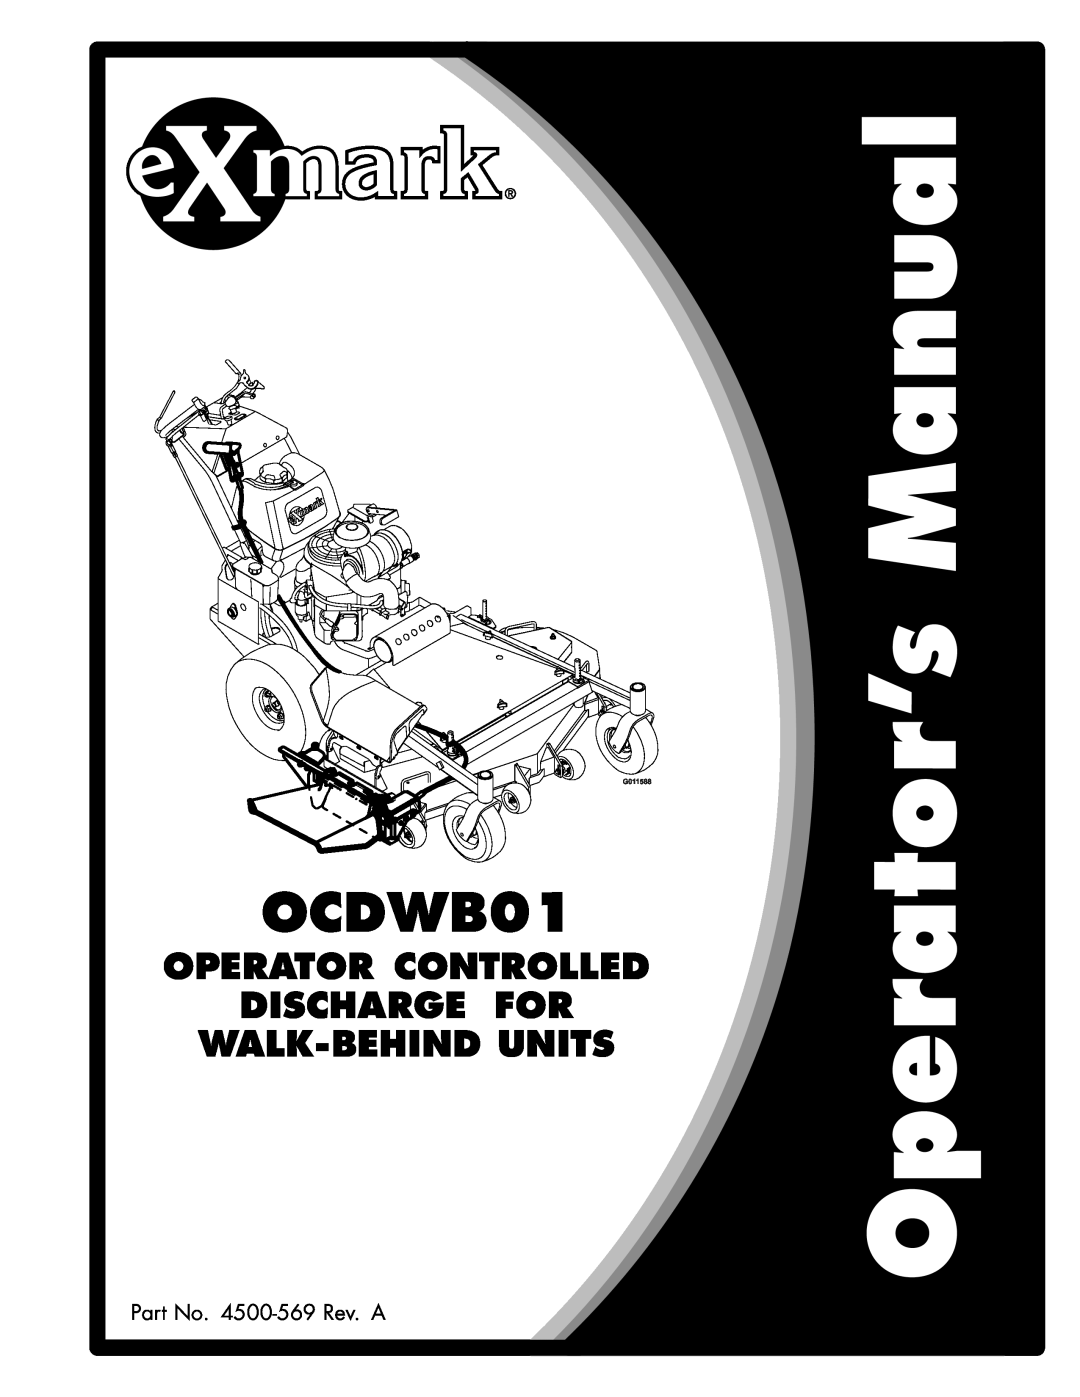 Exmark OCDWB01 manual Operator Controlled Discharge For Walk-Behind Units 